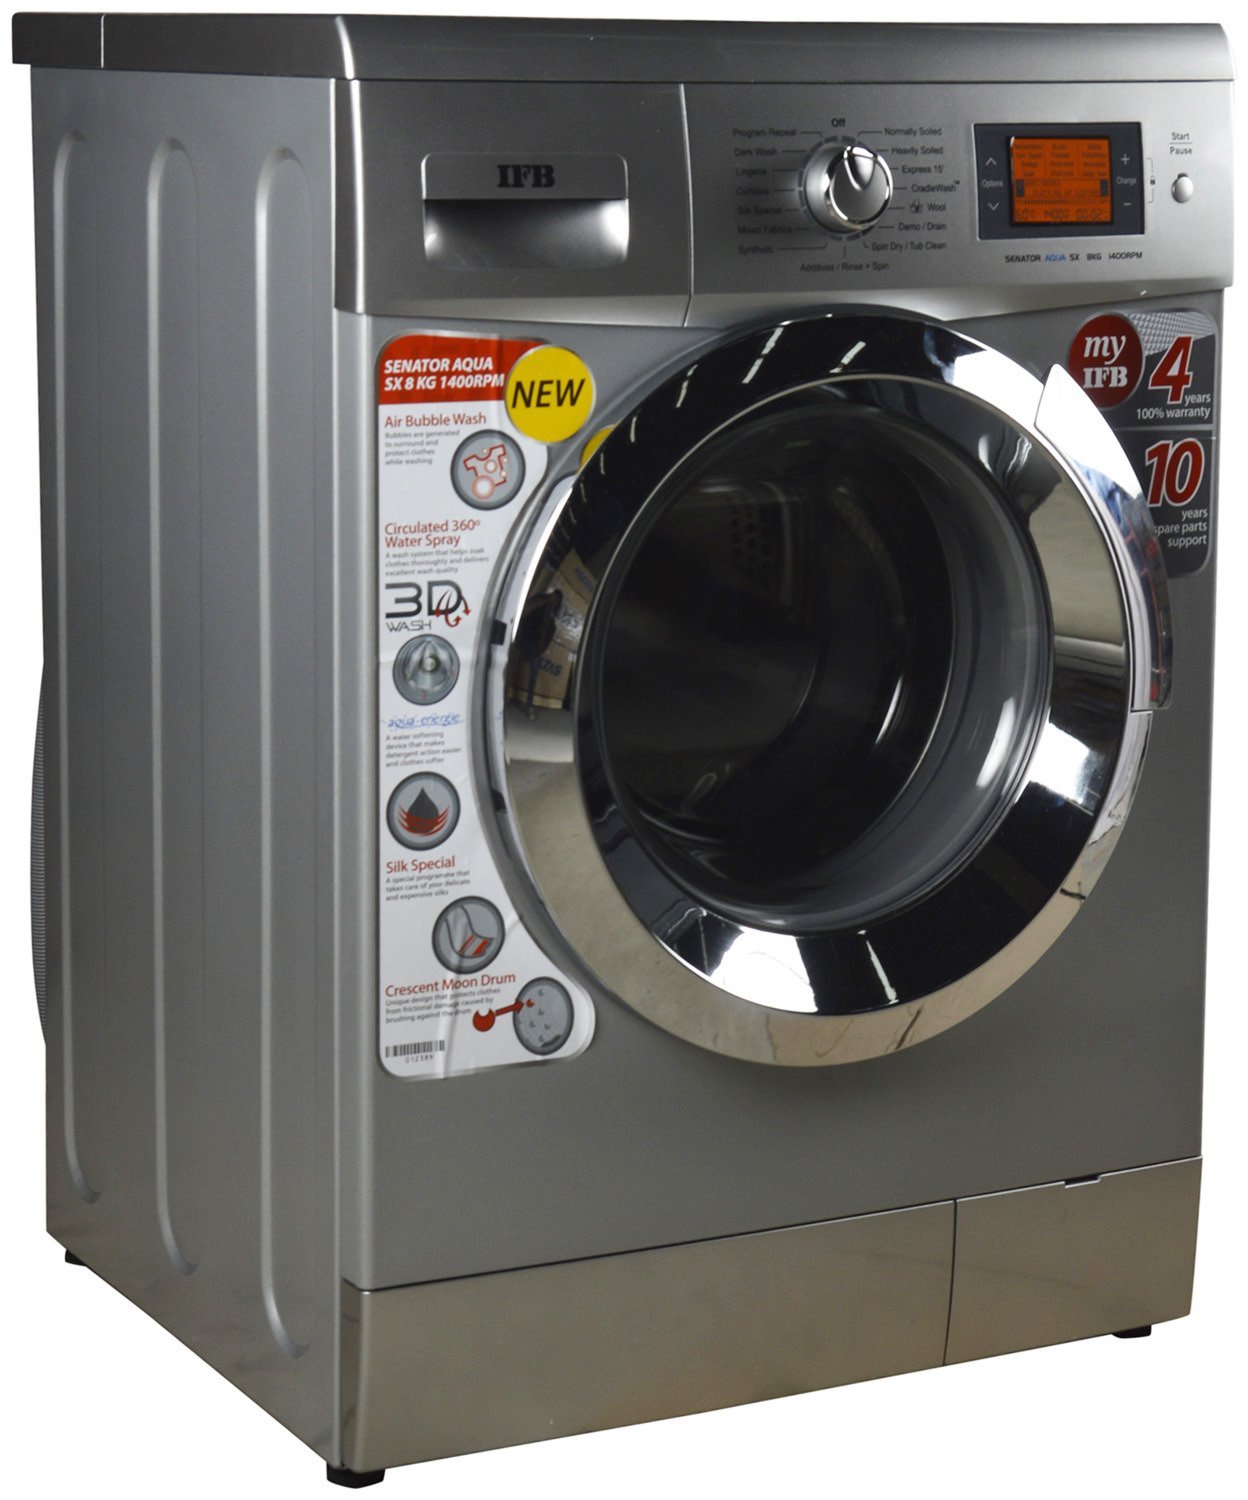 Best Washing Machines in India in 2020